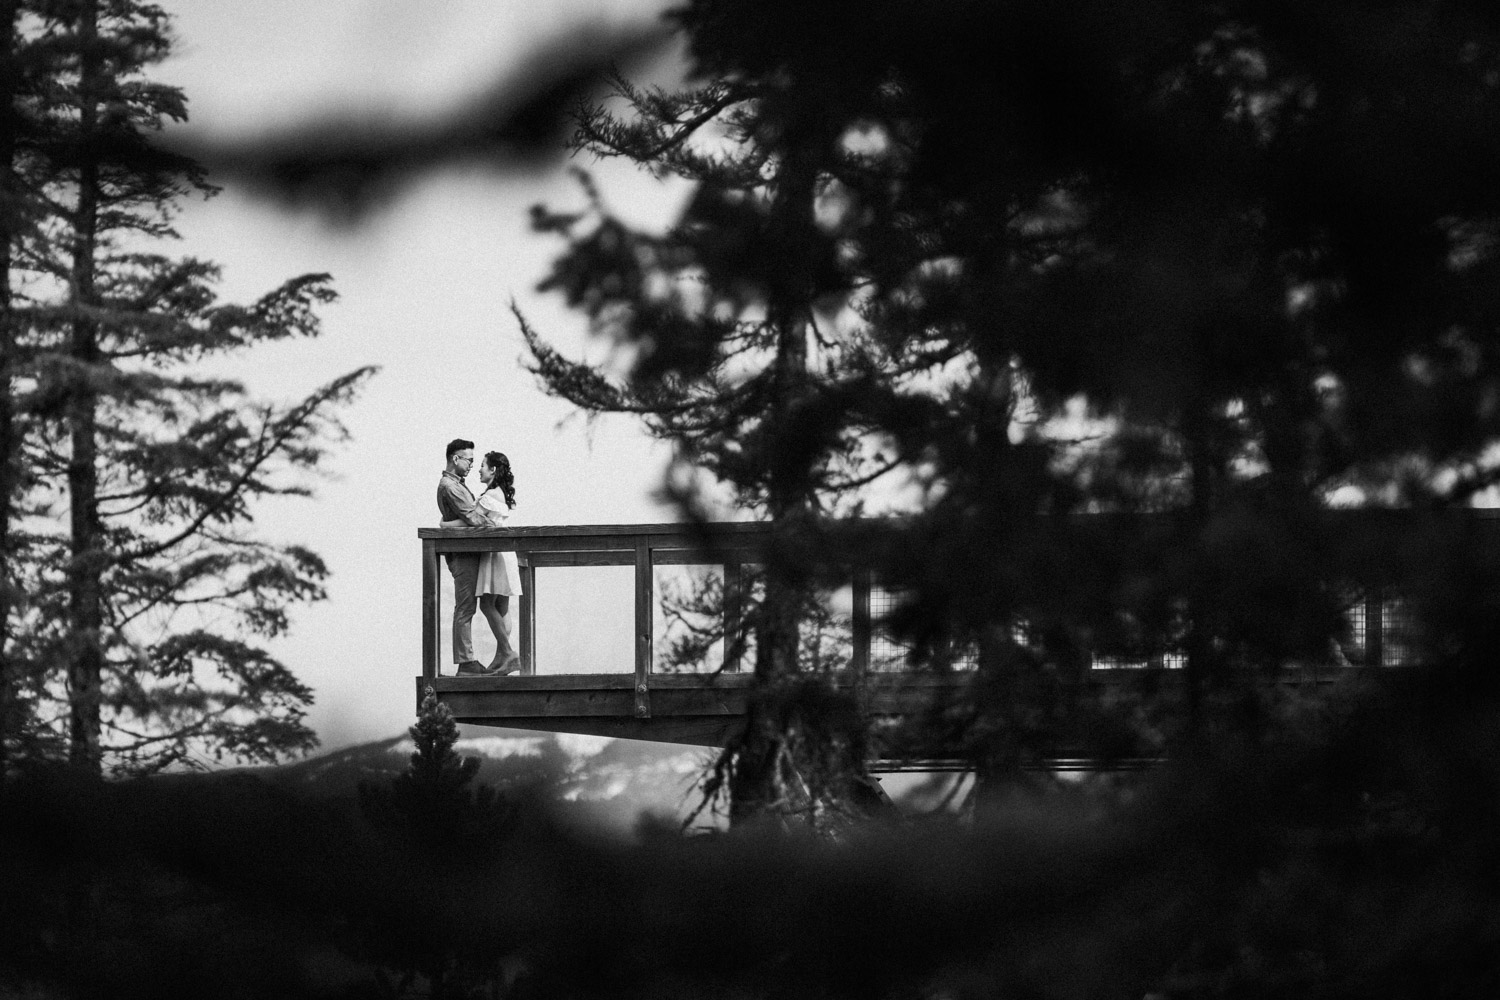 sea to sky gondola engagement photography chief lookout platform